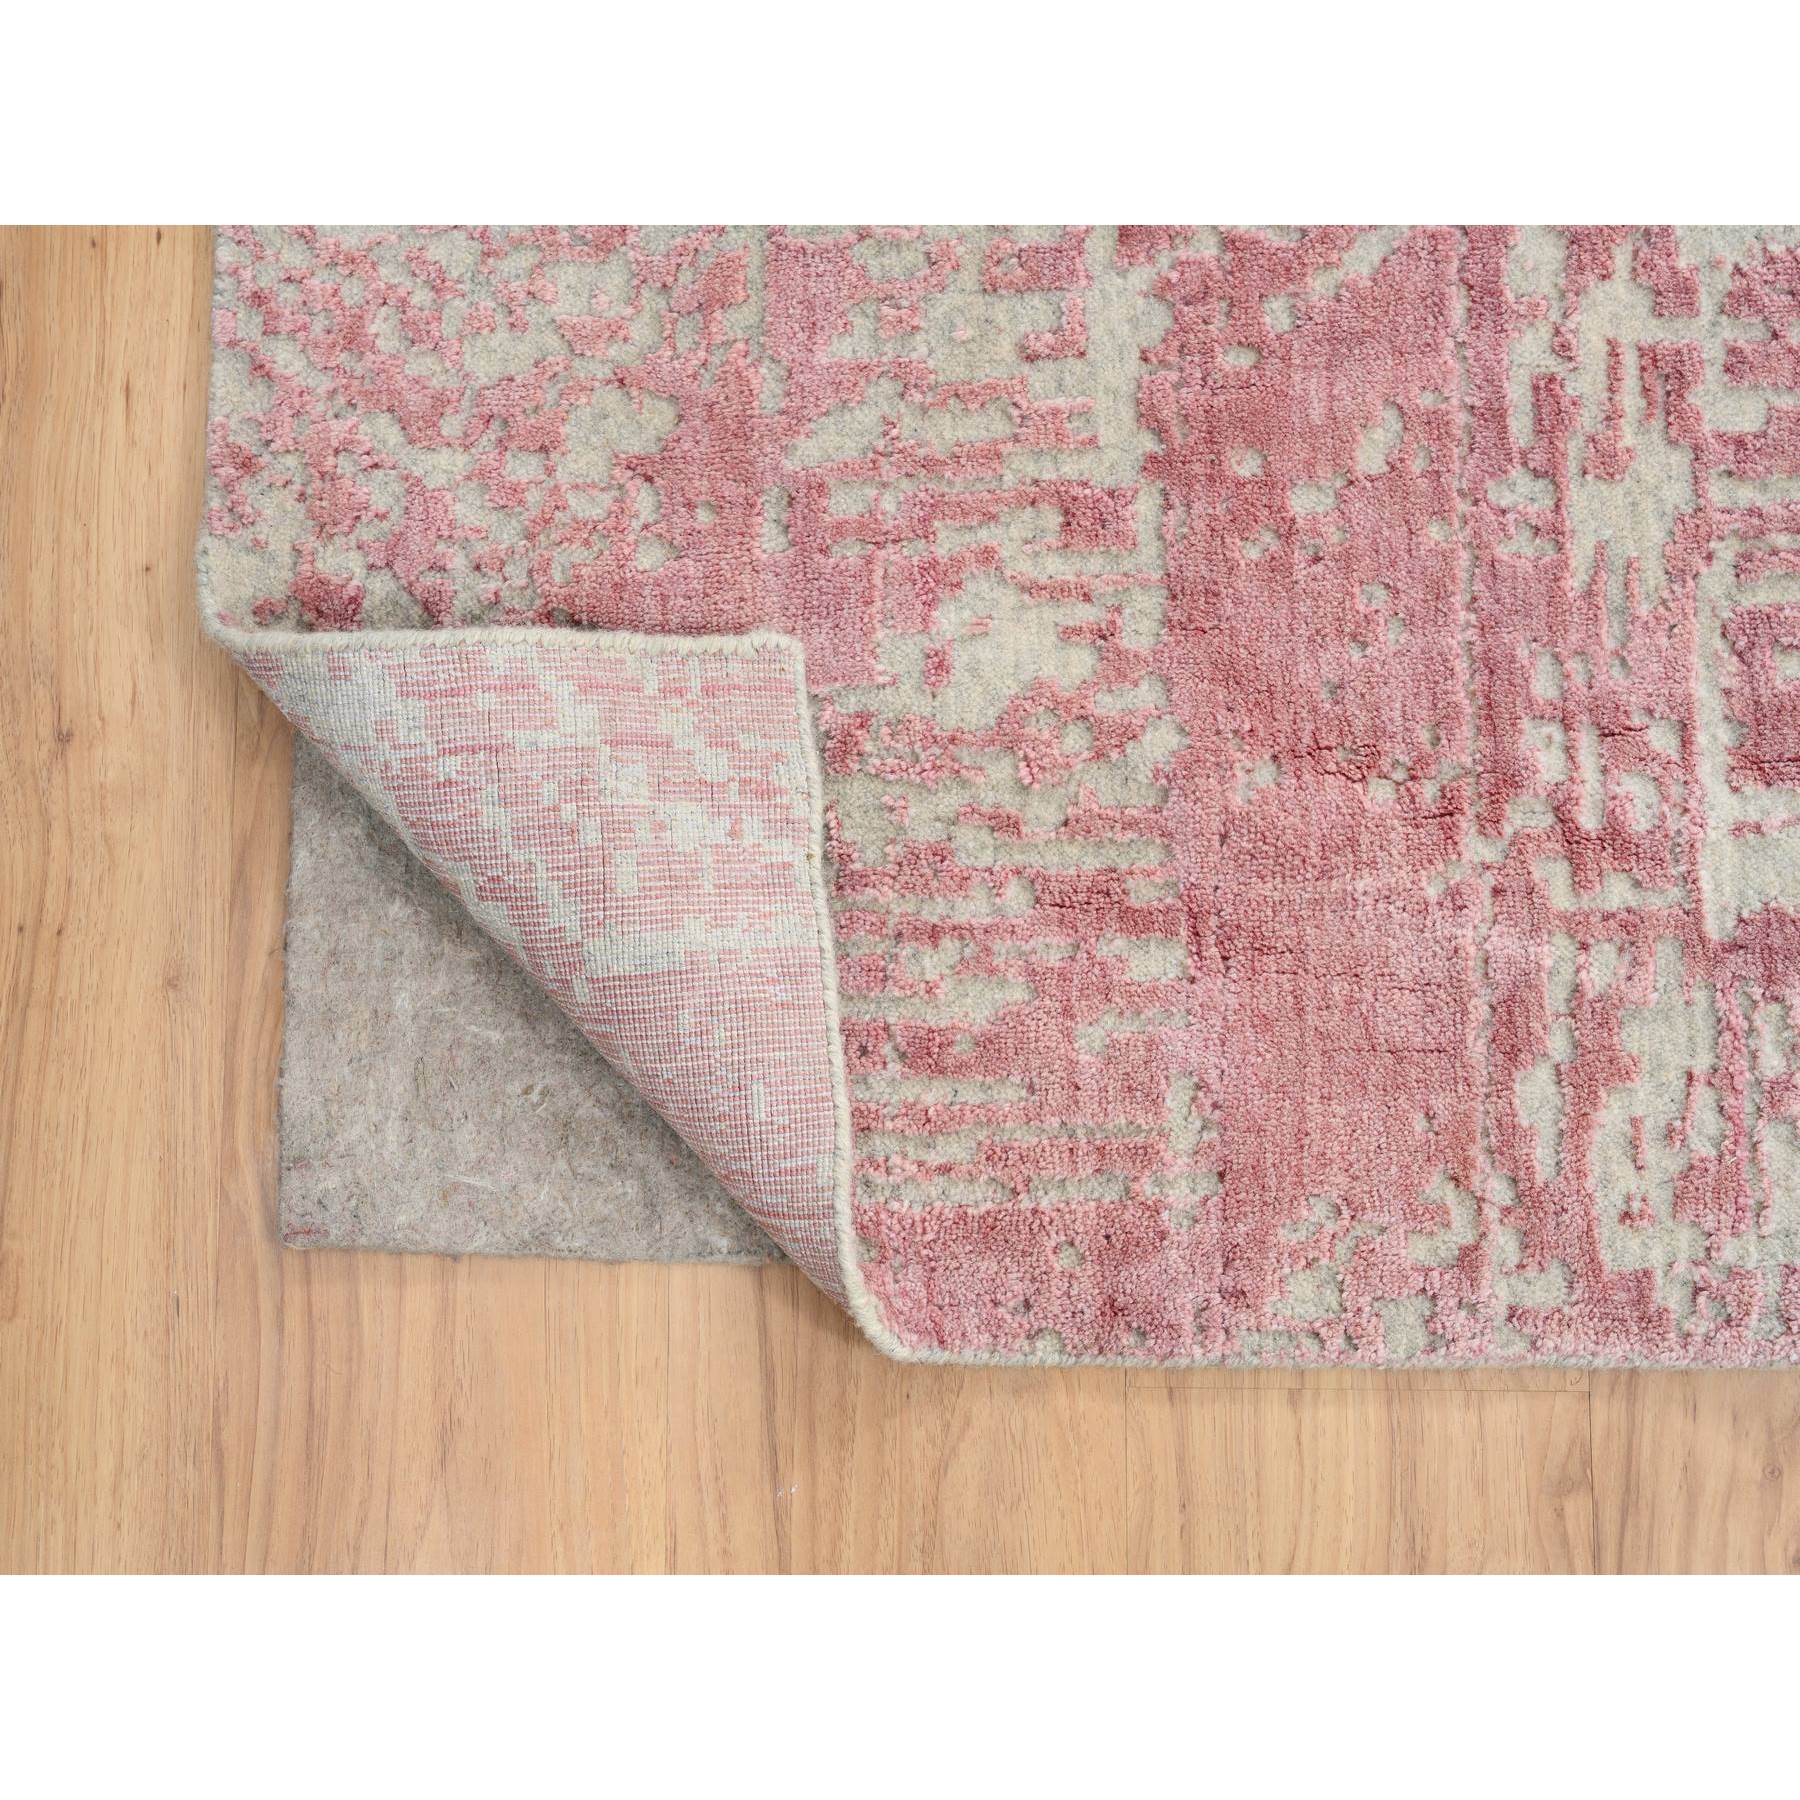 11'10"x15'1" Rose Pink, Jacquard Hand Loomed, All Over Design Wool and Art Silk, Oversized Oriental Rug 